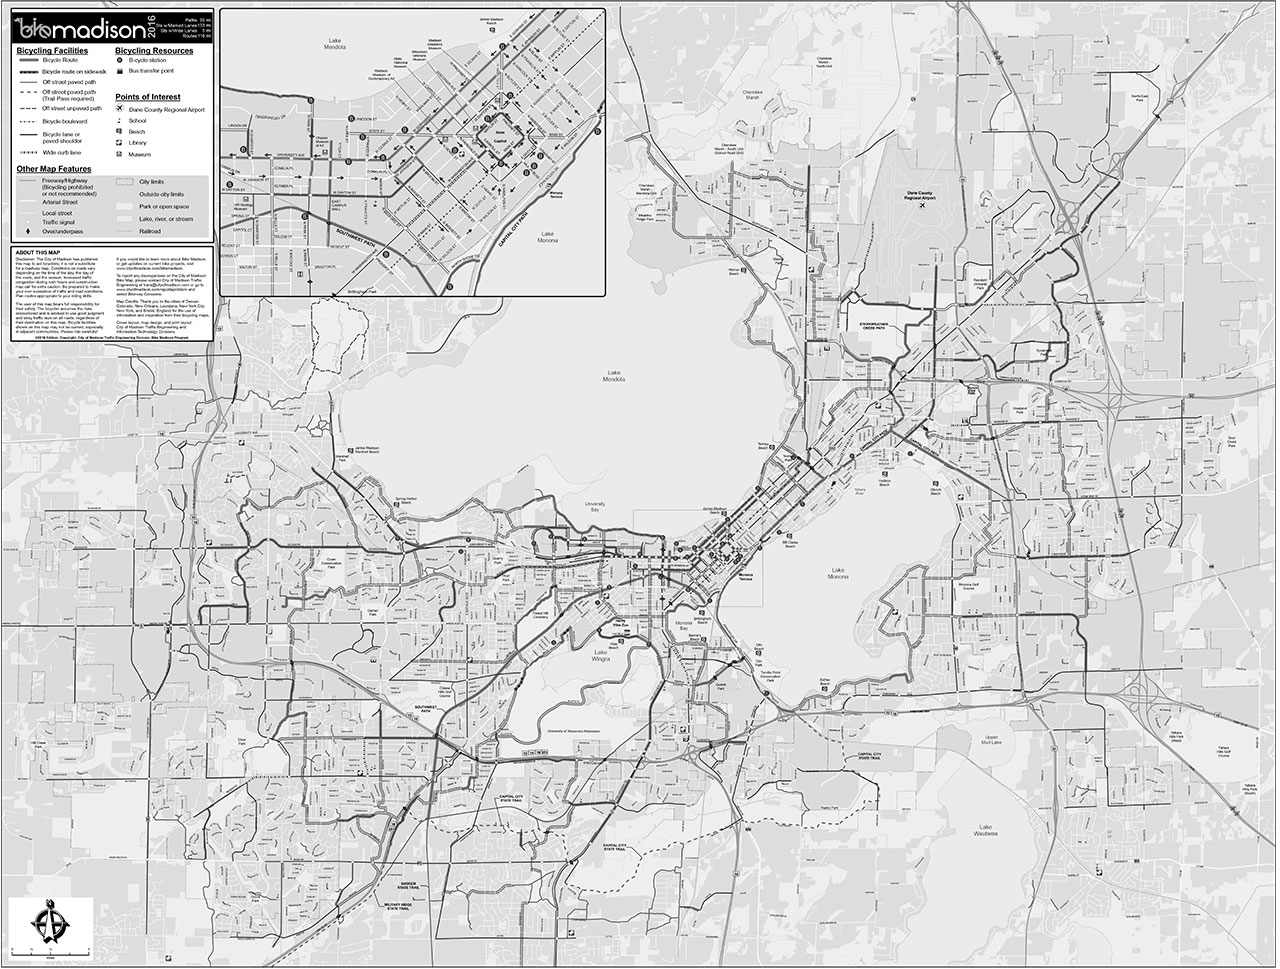 Madison Wi Zip Code Map - Maping Resources